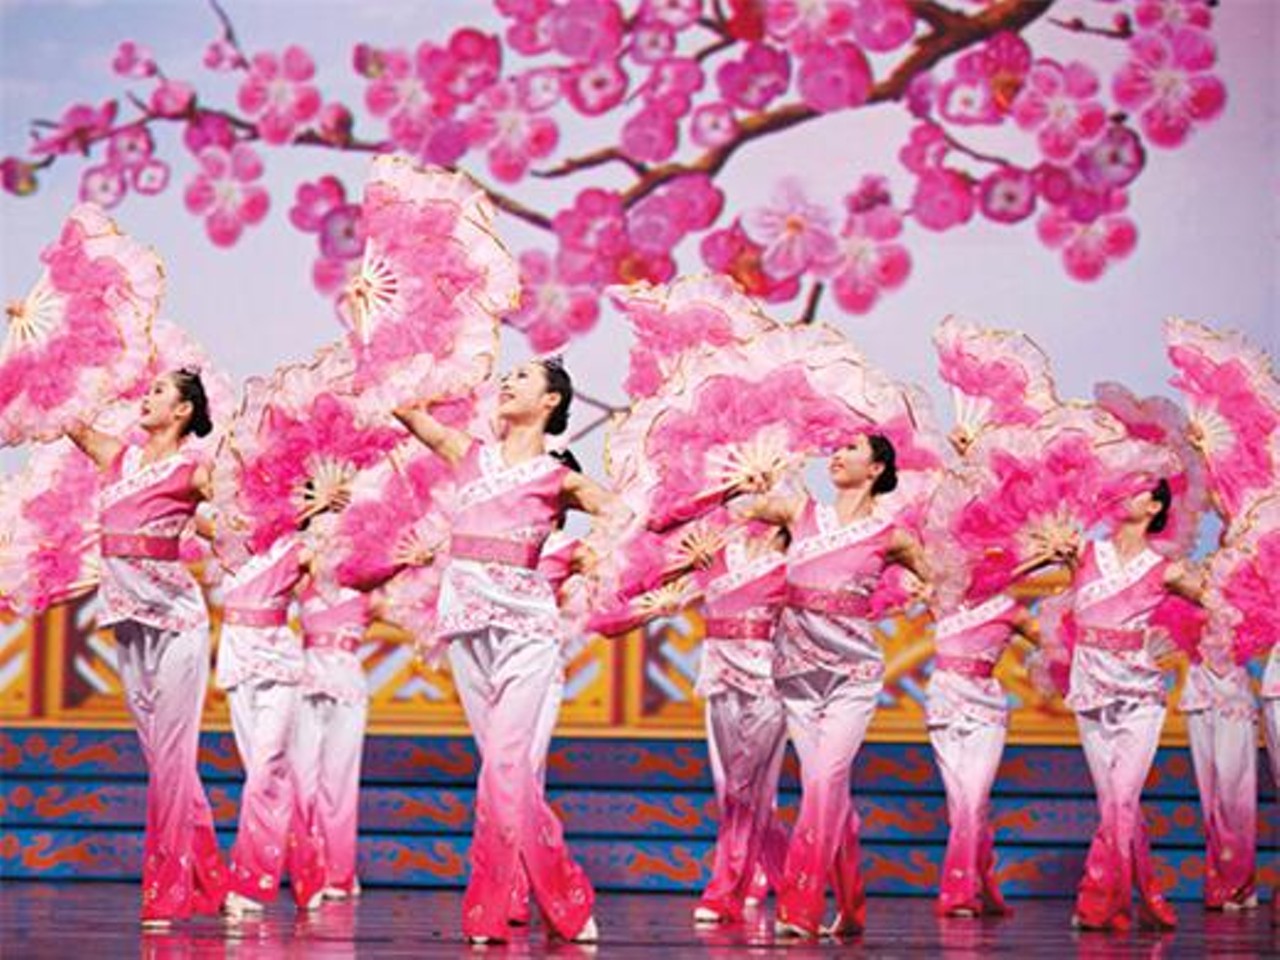 THURSDAY, 06-SUNDAY, 09
Shen Yun
Bringing 5,000 years of traditional Chinese culture to the stage, Shen Yun transports audiences back to the past through music and dance while simultaneously pissing off China’s communist regime. This group, a nonprofit dance company based in New York, merges the elements of colorful costumes, acrobatics, folklore and history to share a vibrant version of ancient Chinese history. Despite battling with the CCP over the years, the company continues to tour internationally and will be landing in Detroit this weekend. Immerse yourself in traditional Chinese Culture at the Detroit Opera House. Tickets start at $80.